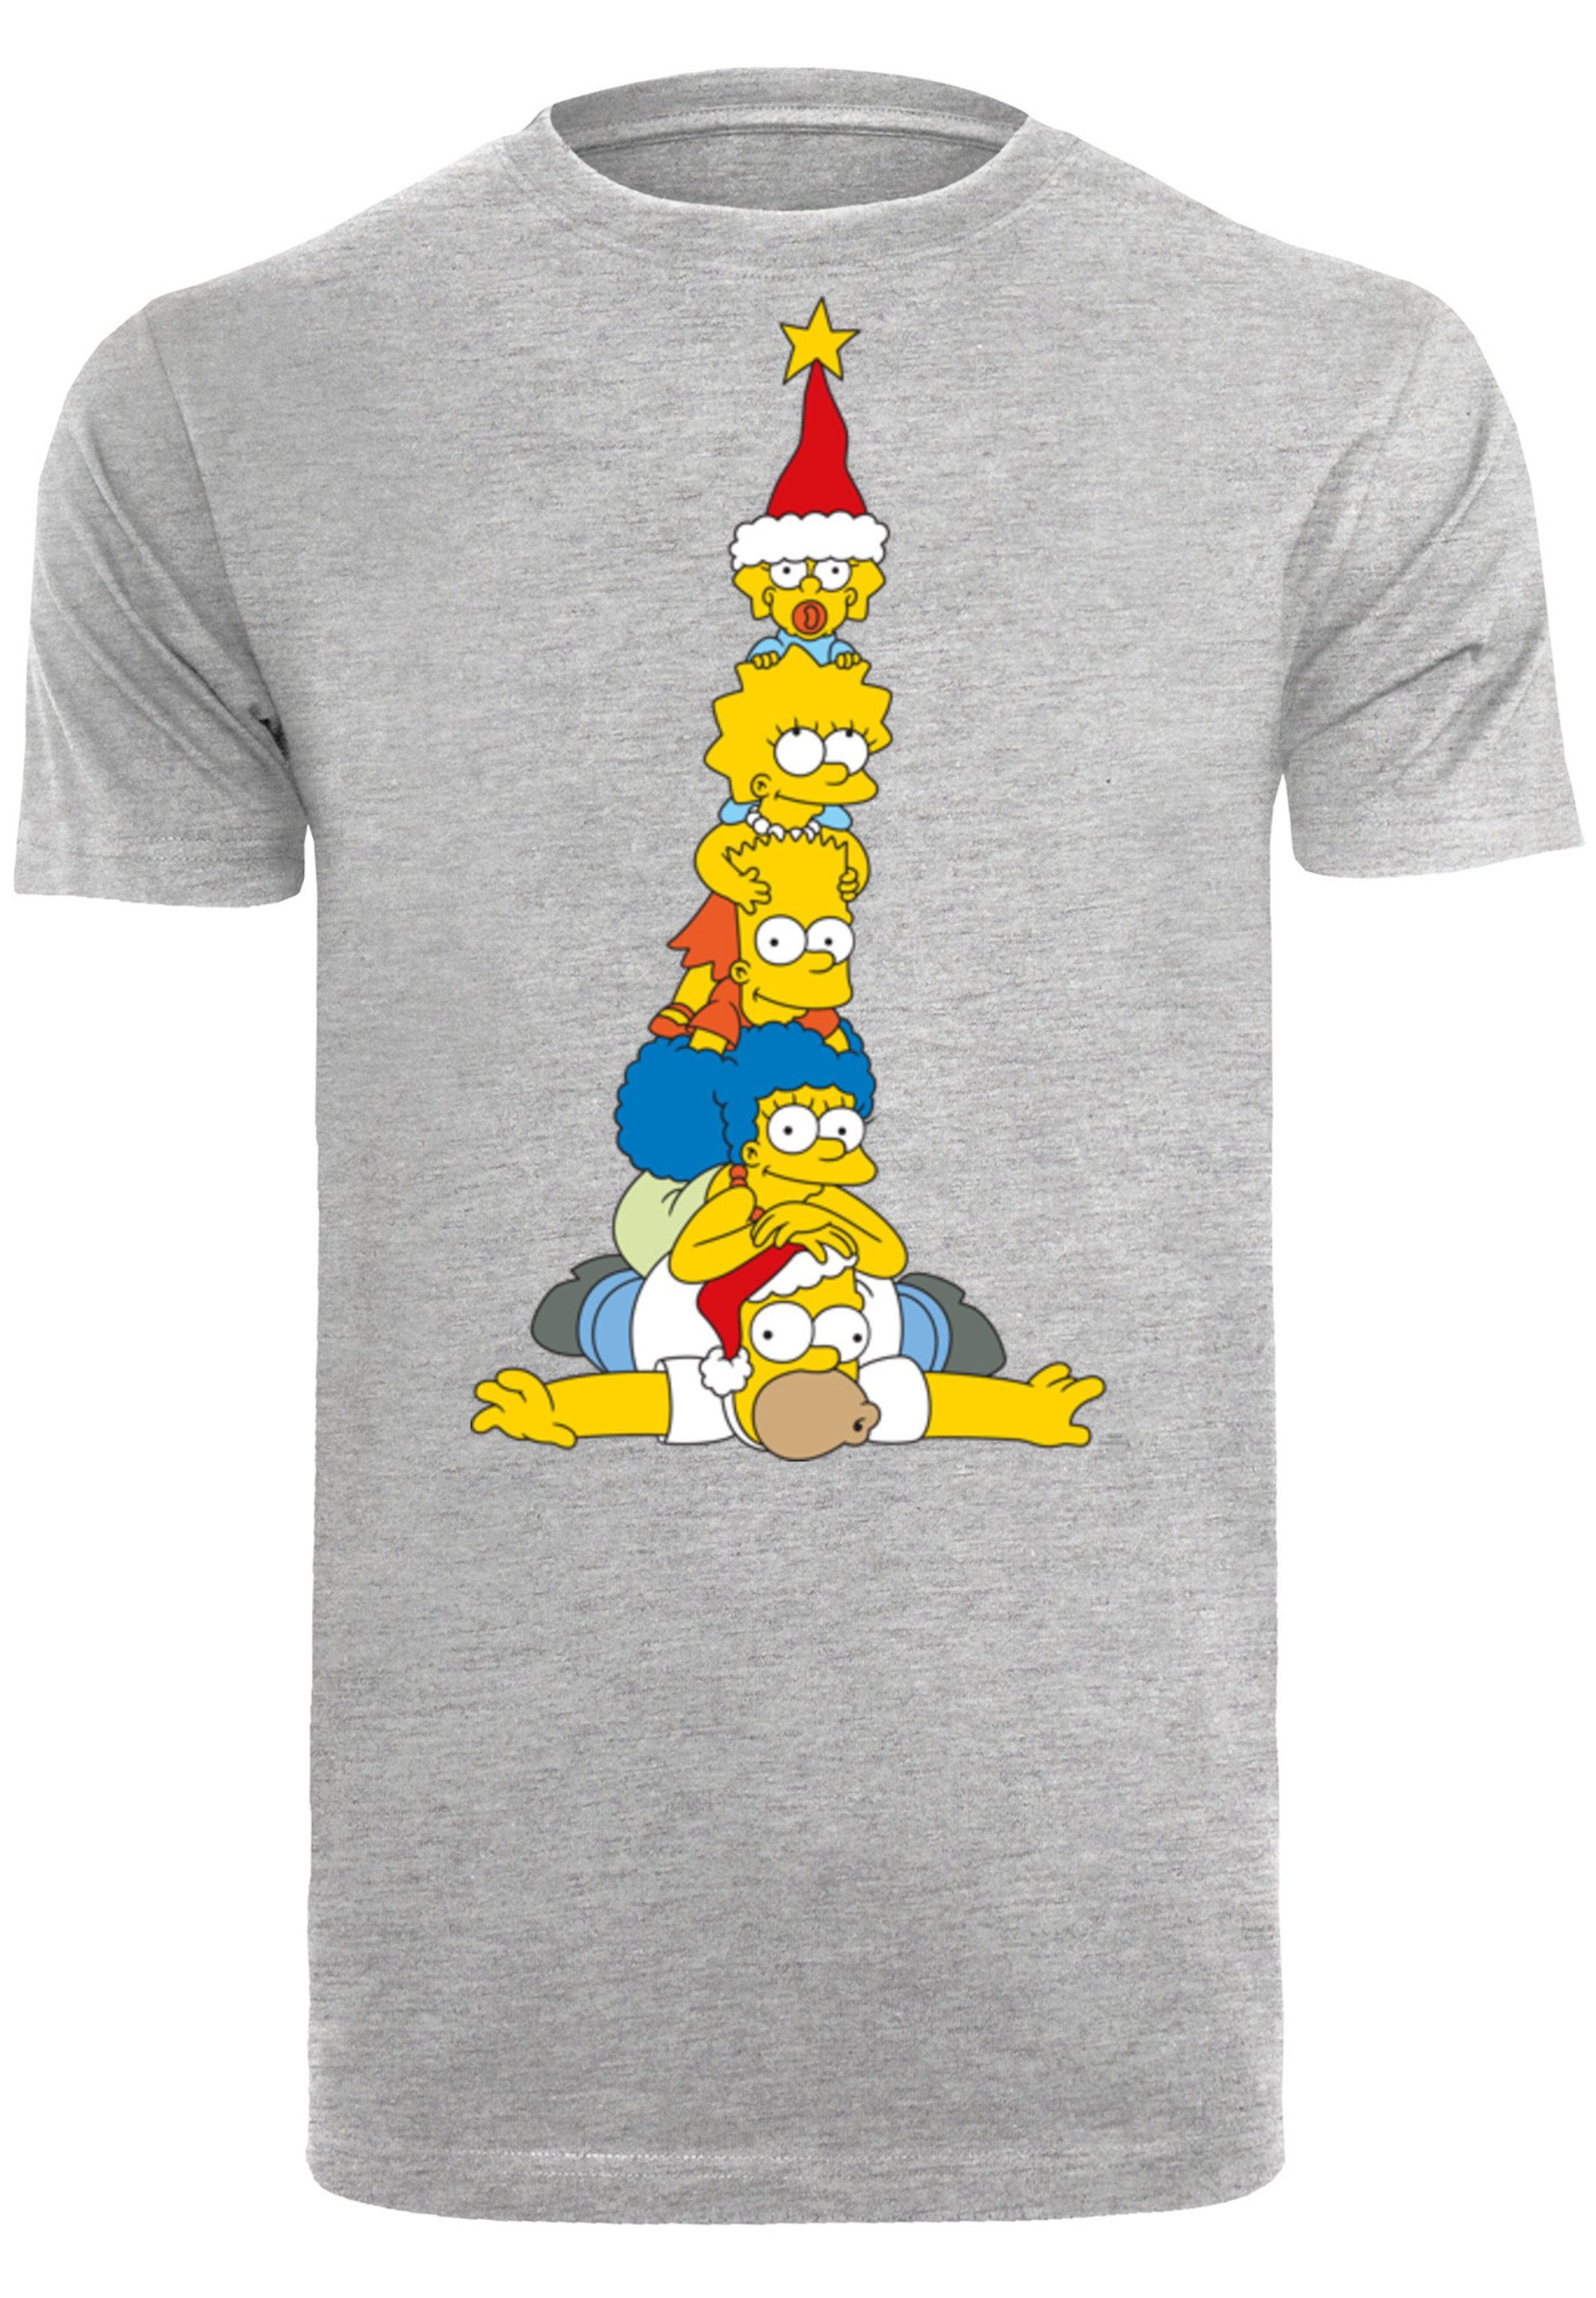 F4NT4STIC T-Shirt The Simpsons heather grey Print Weihnachtsbaum Family Christmas